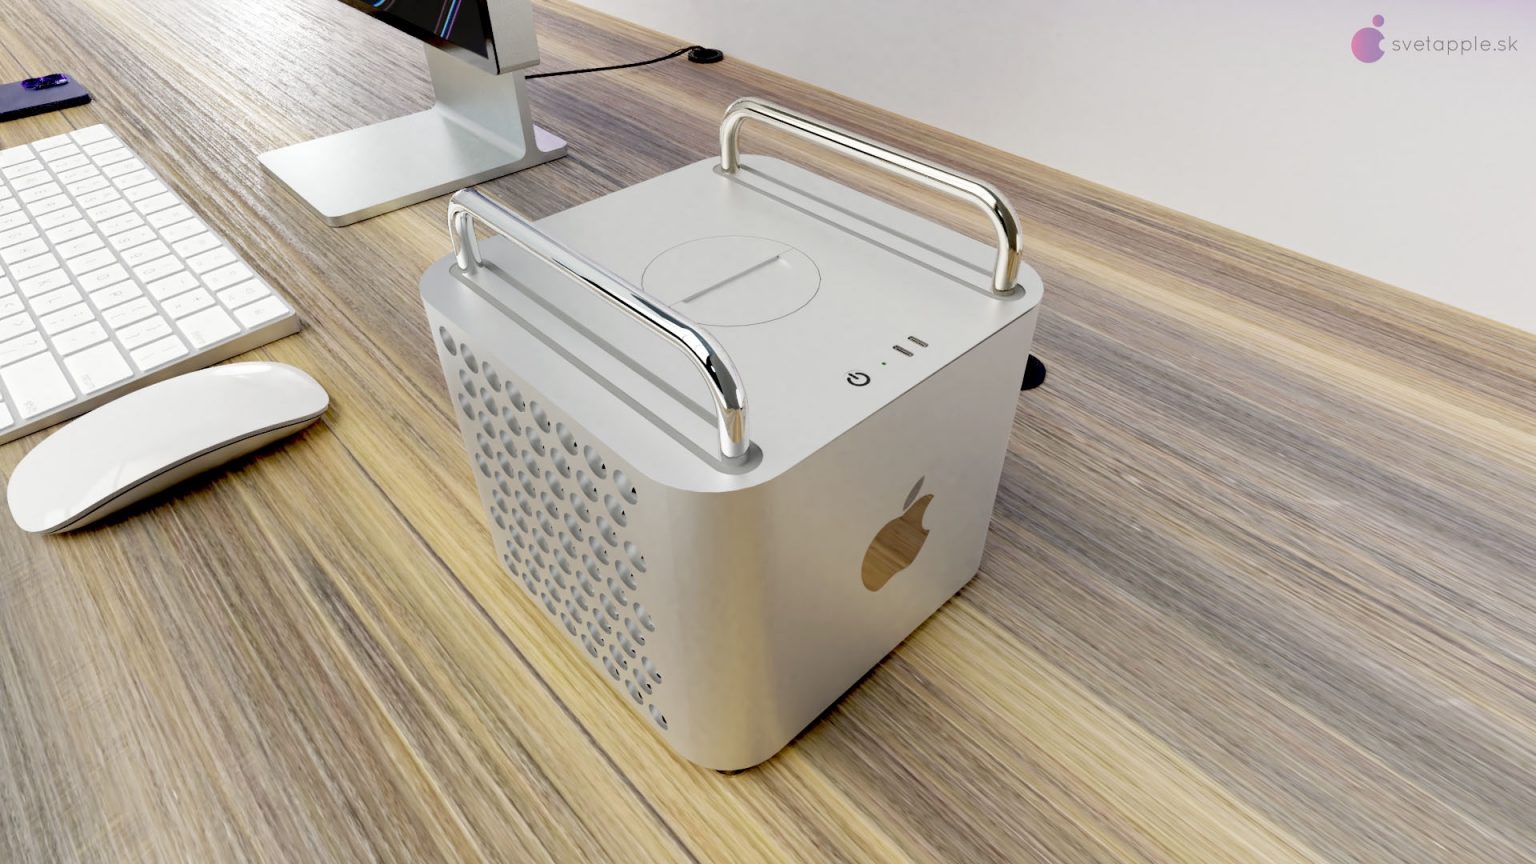 Amazing Mac Pro concept shrinks the casing but keeps the cheese grater